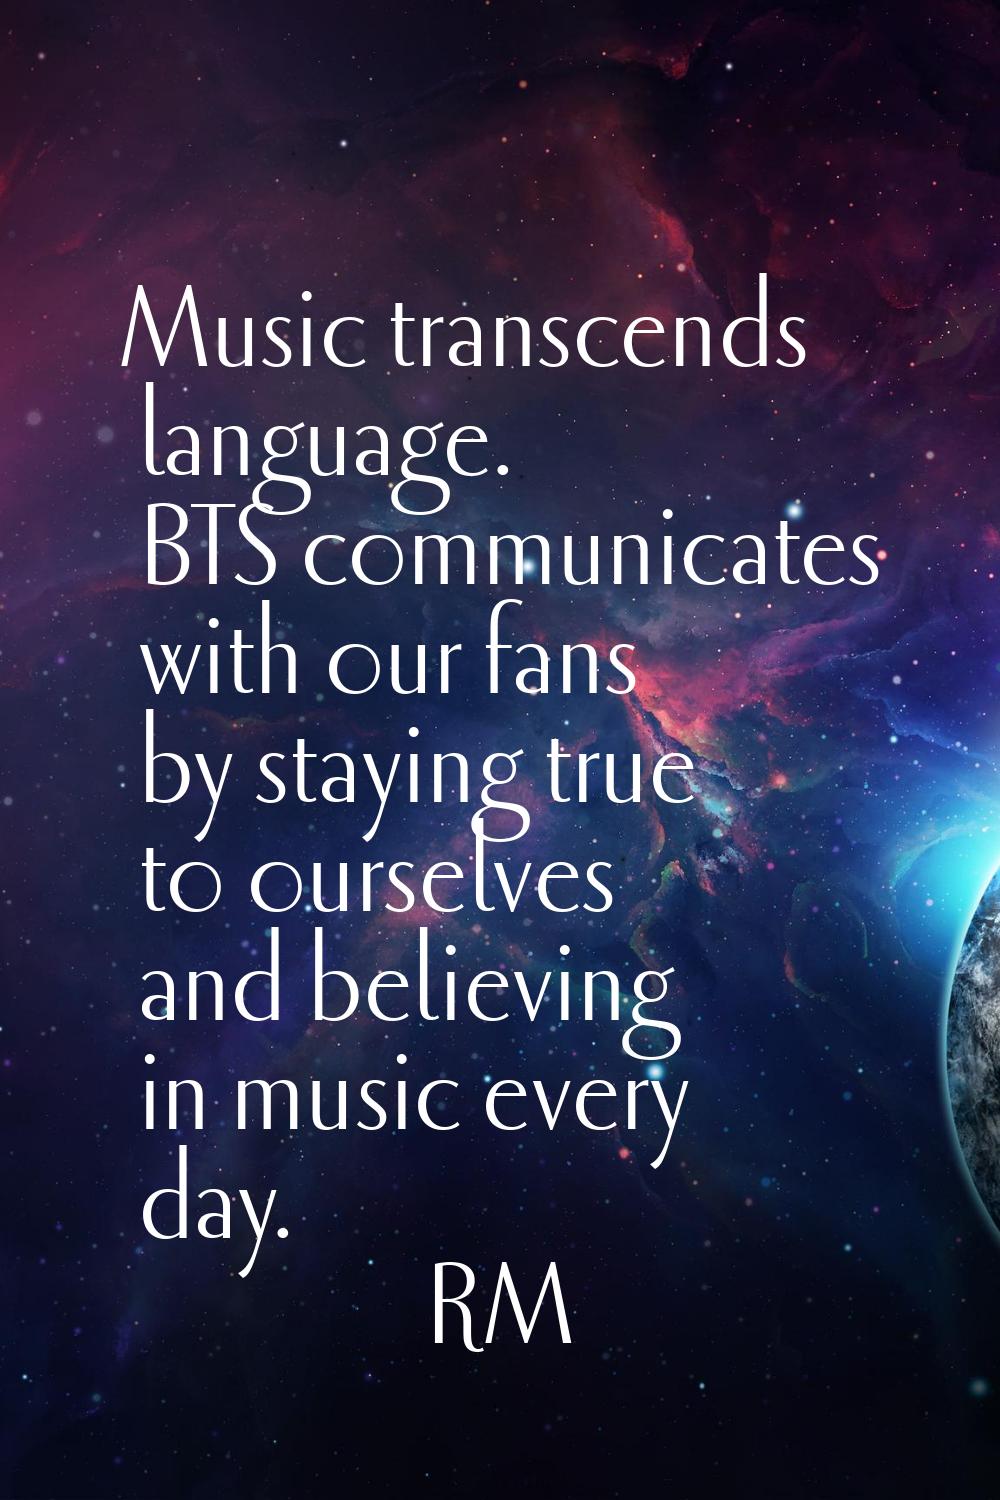 Music transcends language. BTS communicates with our fans by staying true to ourselves and believin